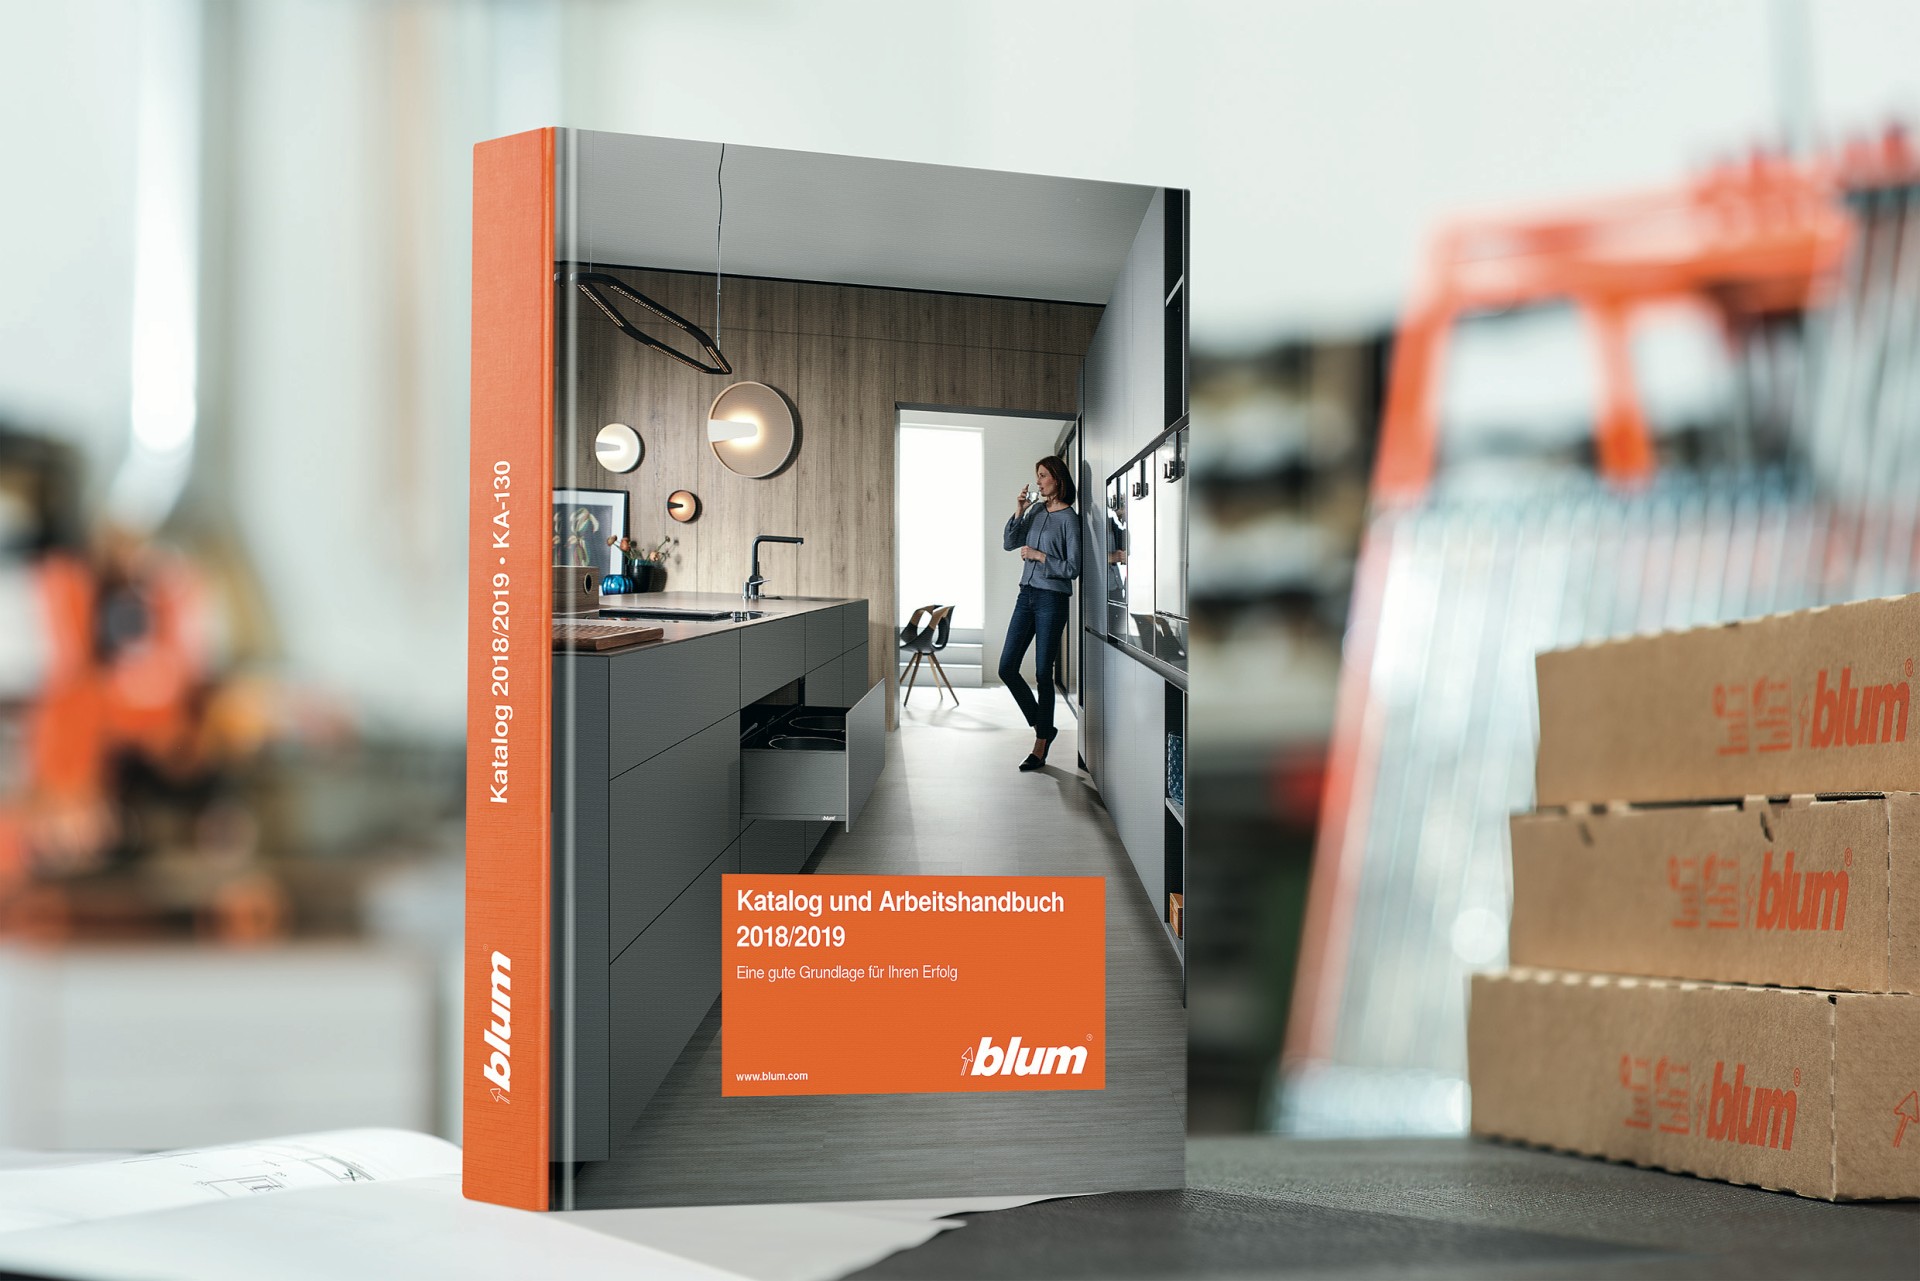 Fittings Solutions By Blum Blum